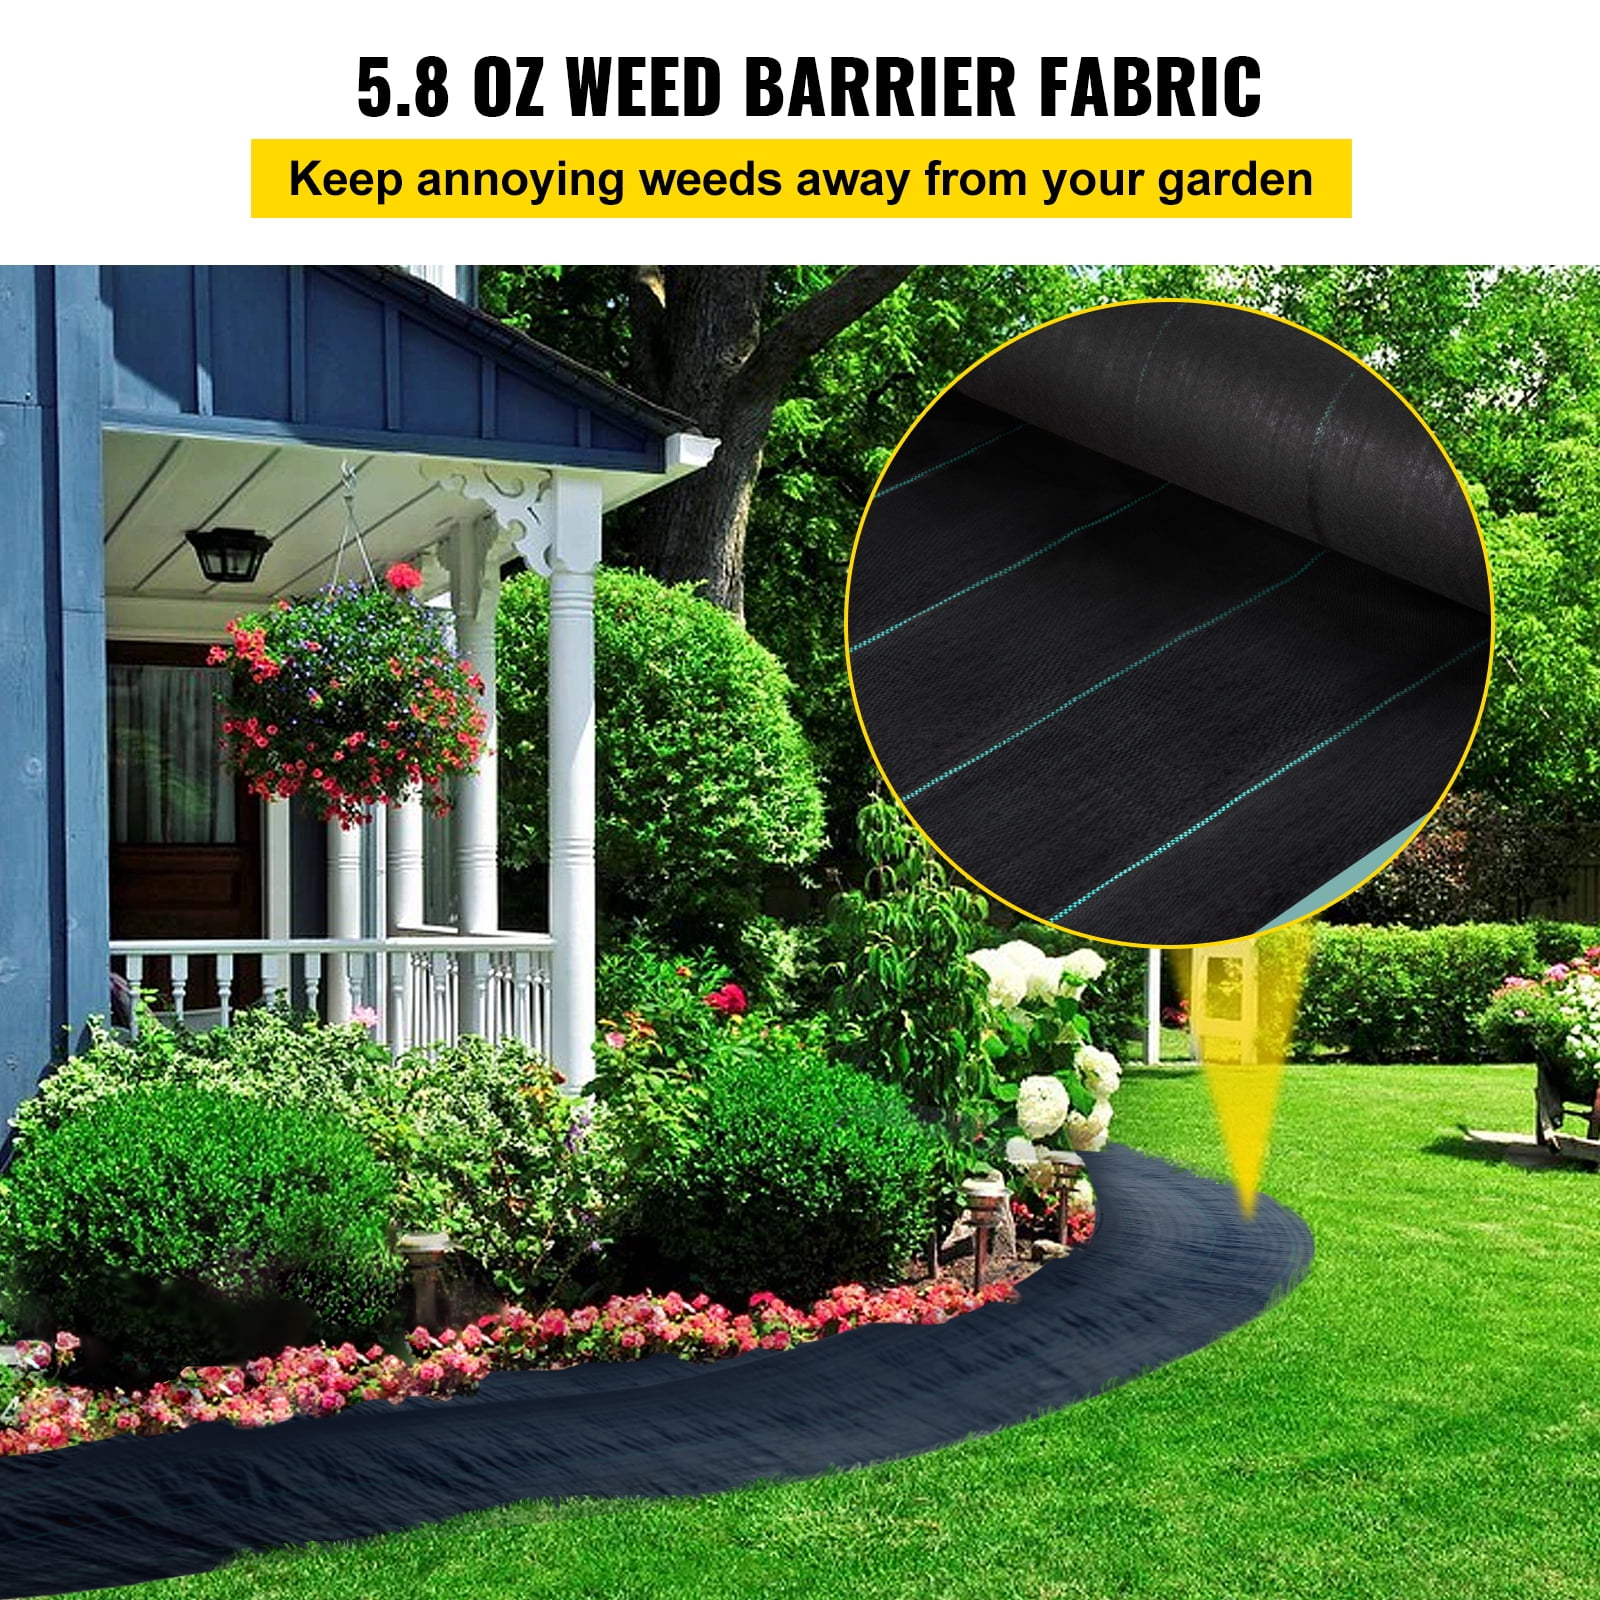 Weed Barrier Landscape Fabric Heavy Duty Durable Weed Blocker Cover Outdoor Gardening Weed Control Mat Garden Driveway Ground Cover Weed Cloth Geotextile Fabric 5.8oz 4ft x 300ft 4ft x 300ft